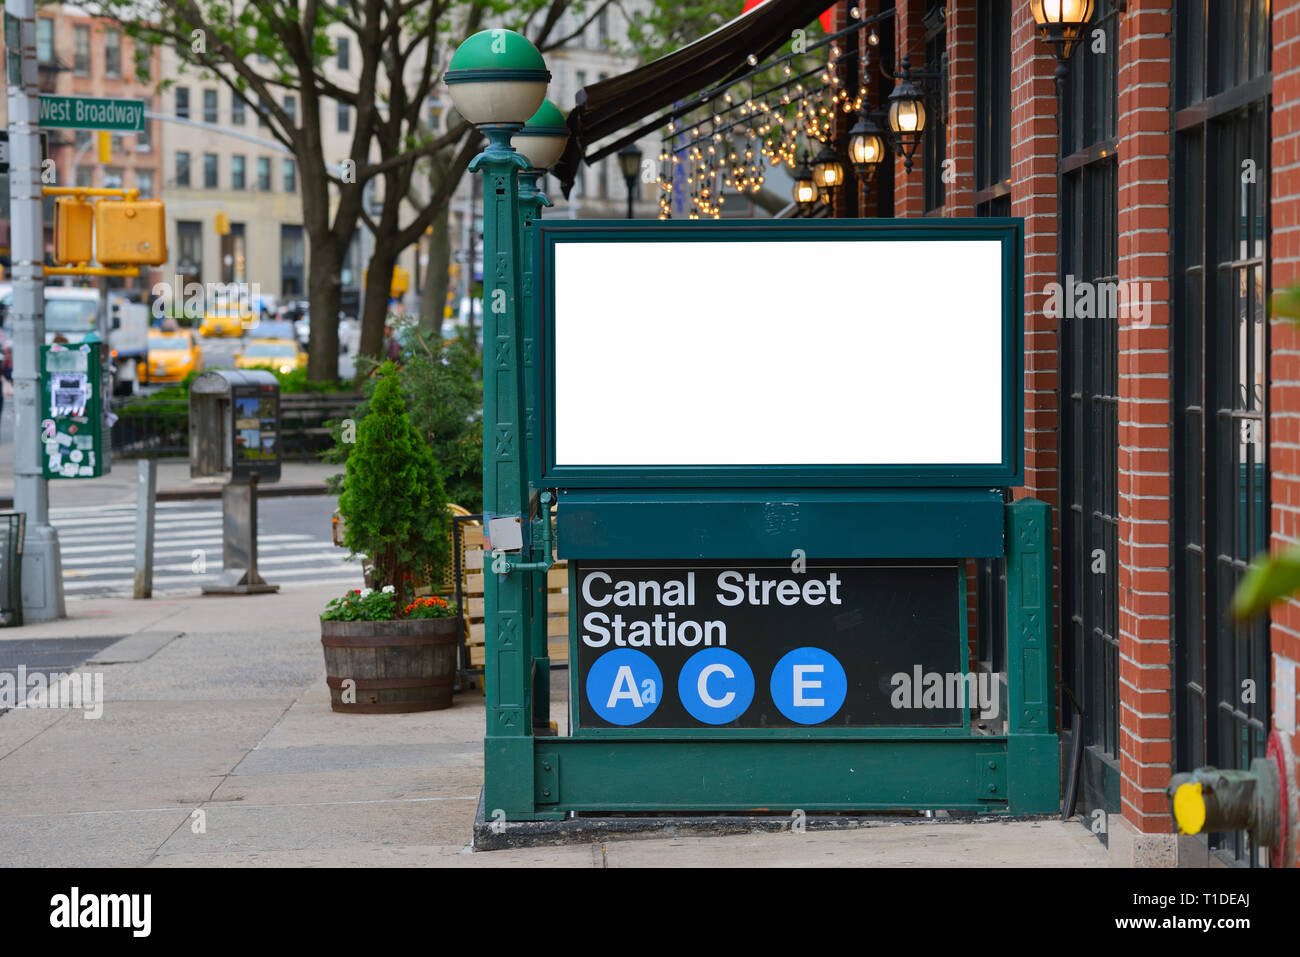 Download Outdoor Advertising Mockup Blank Billboard On Subway Station Entrance Clipping Path Included Stock Photo Alamy